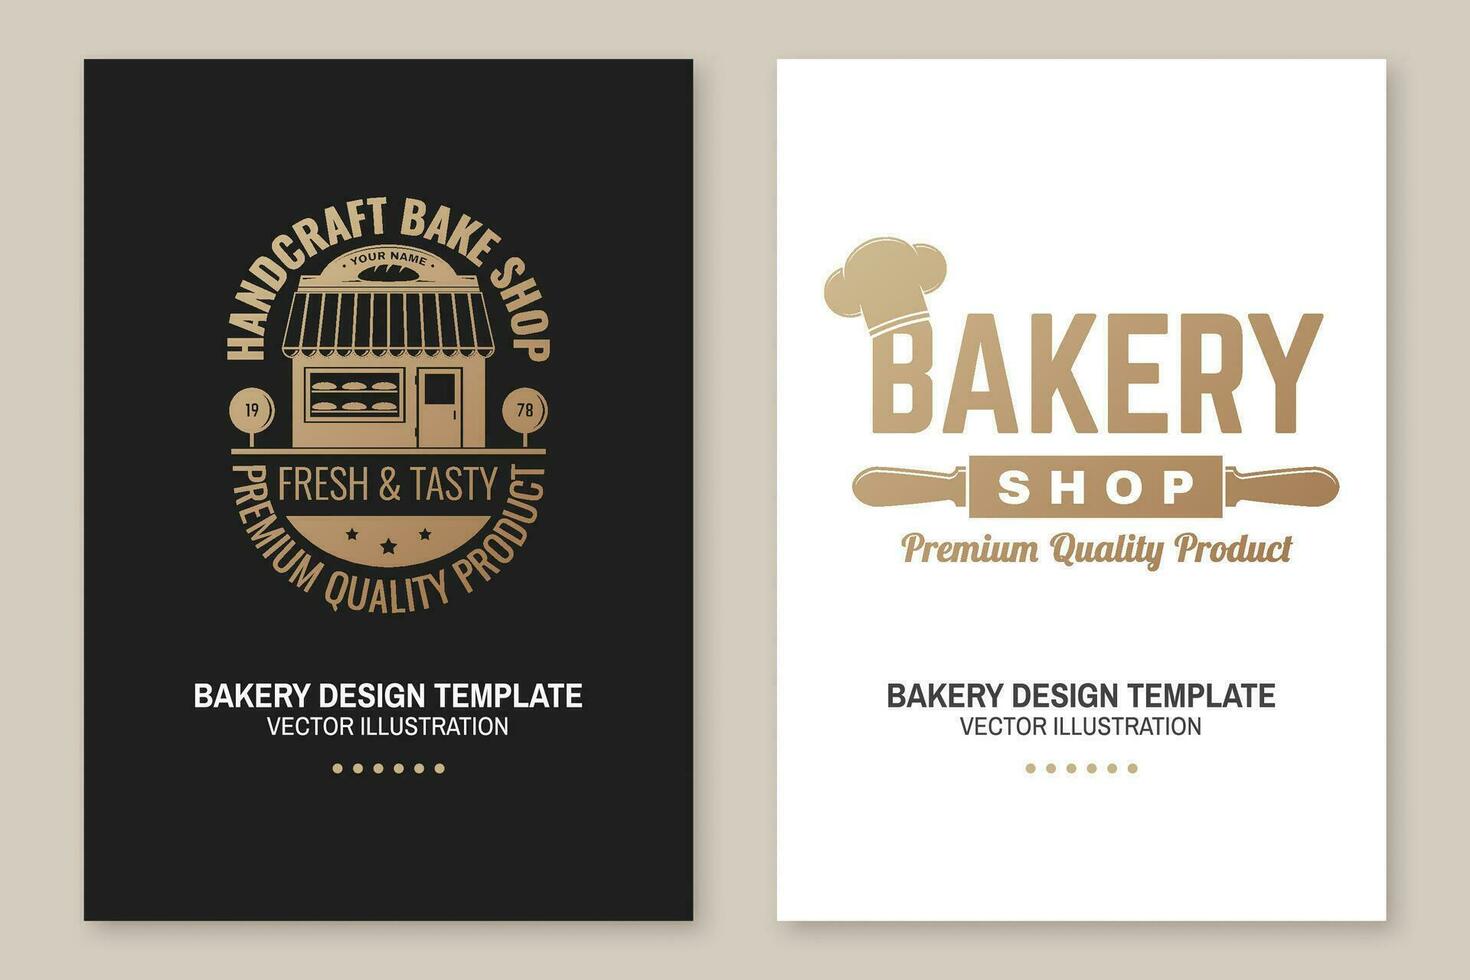 Set of Bakery shop badge. Vector Concept for badge, shirt, label, print, stamp, tee. Design with windmill, rolling pin, dough, wheat ears silhouette. For restaurant identity objects, packaging, menu